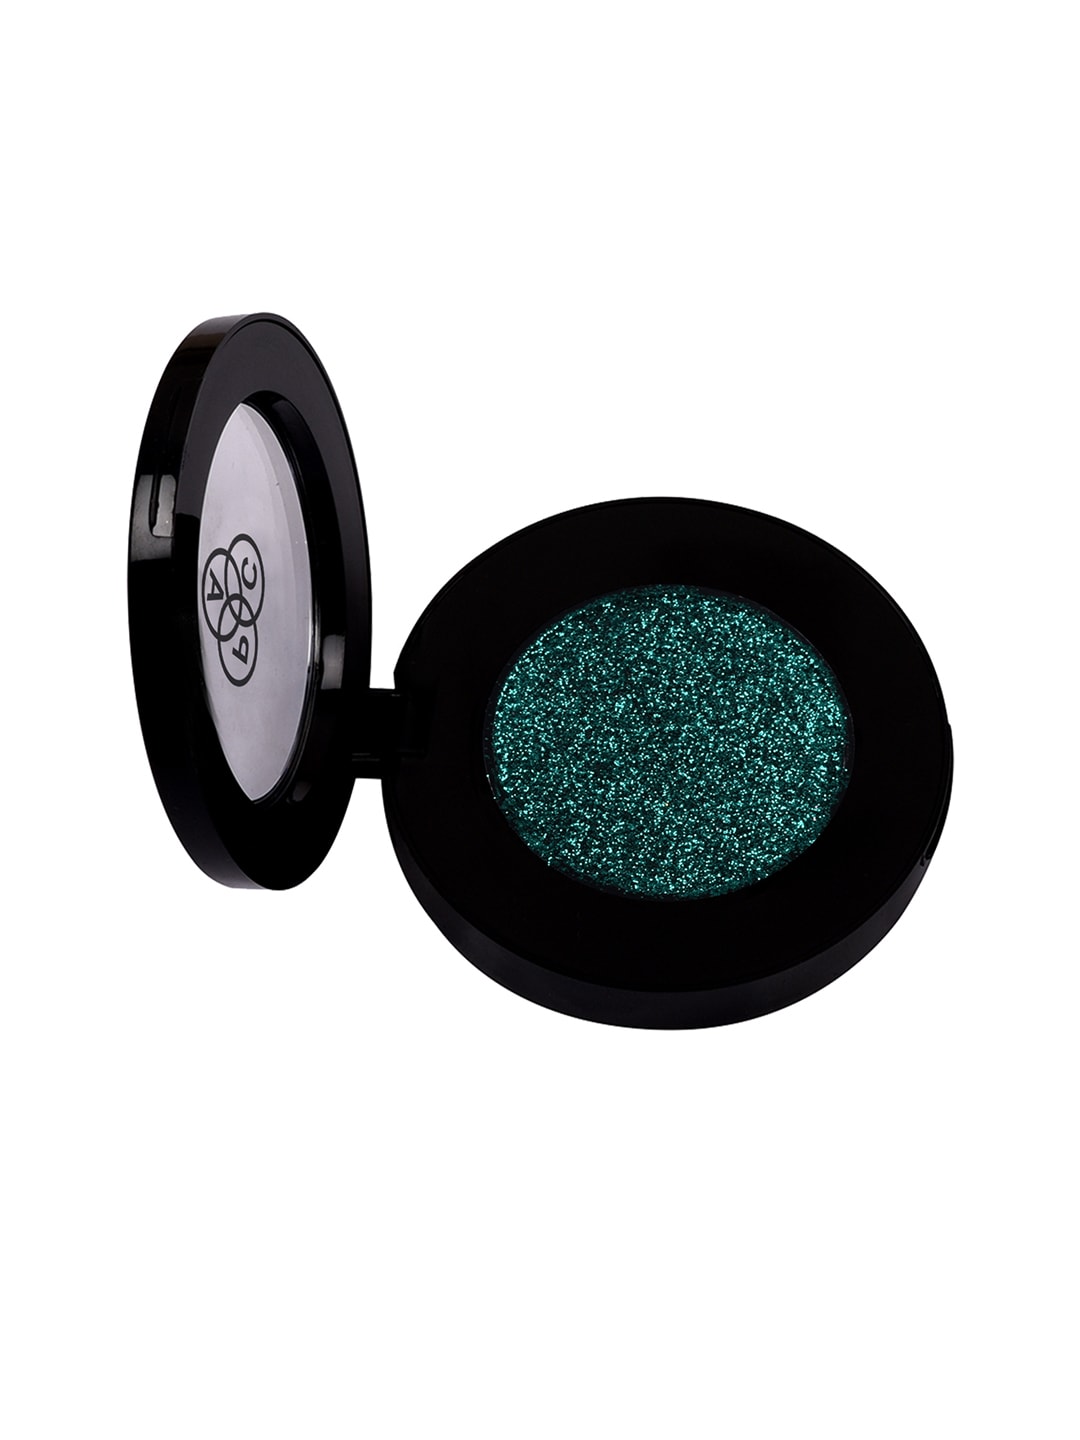 PAC 37 Party Mode Pressed Glitter Eyeshadow 3 g Price in India